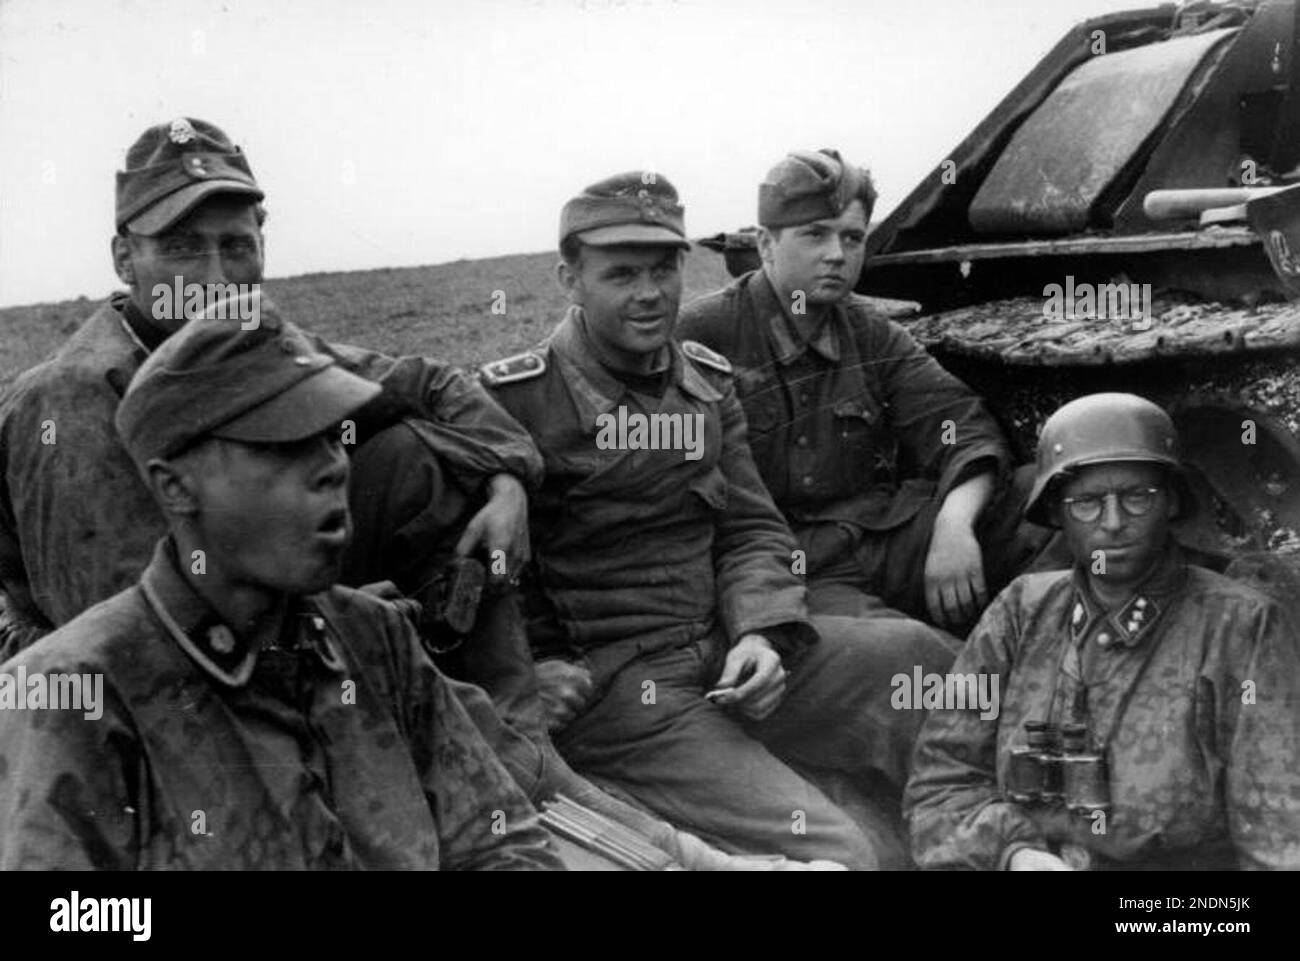 Soldiers of the 3rd SS Panzer division 'Totenkopf' at rest next to a destroyed Soviet tank T-34 in Romania in 1944. Photo Bundesarchiv Bild 101I-024-3535-30, Ostfront, Waffen-SS-Angehörige bei Rast.jpg Stock Photo